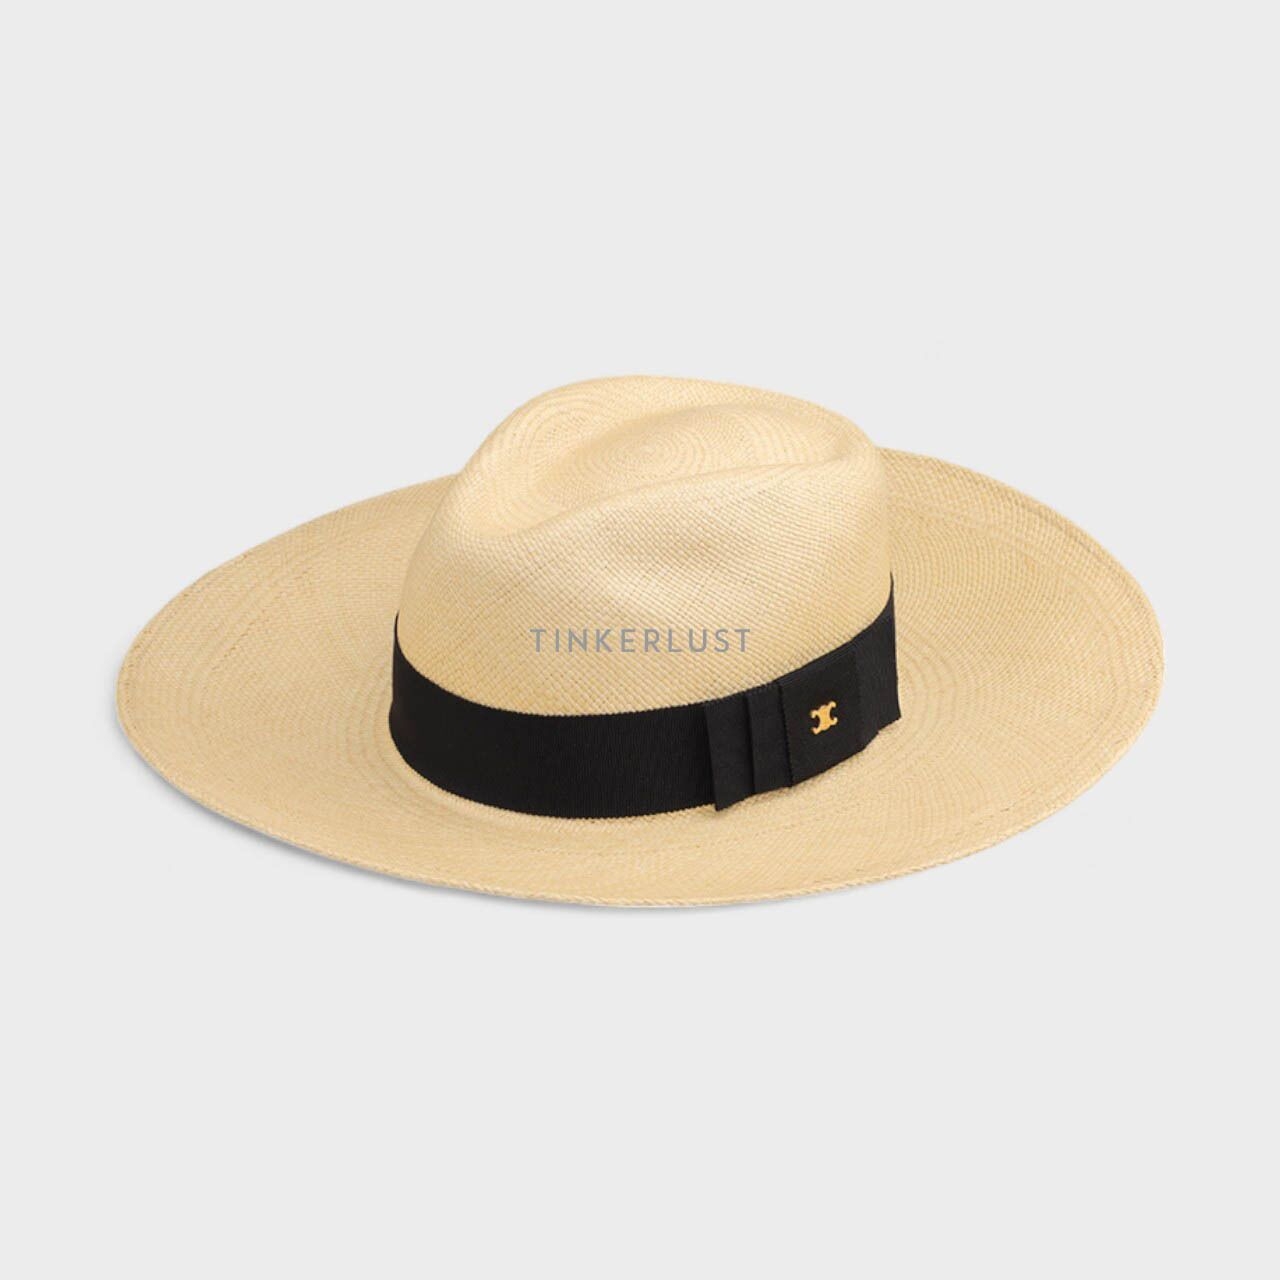 Celine Women Straw Panama Hat in Natural with Triomphe Signature